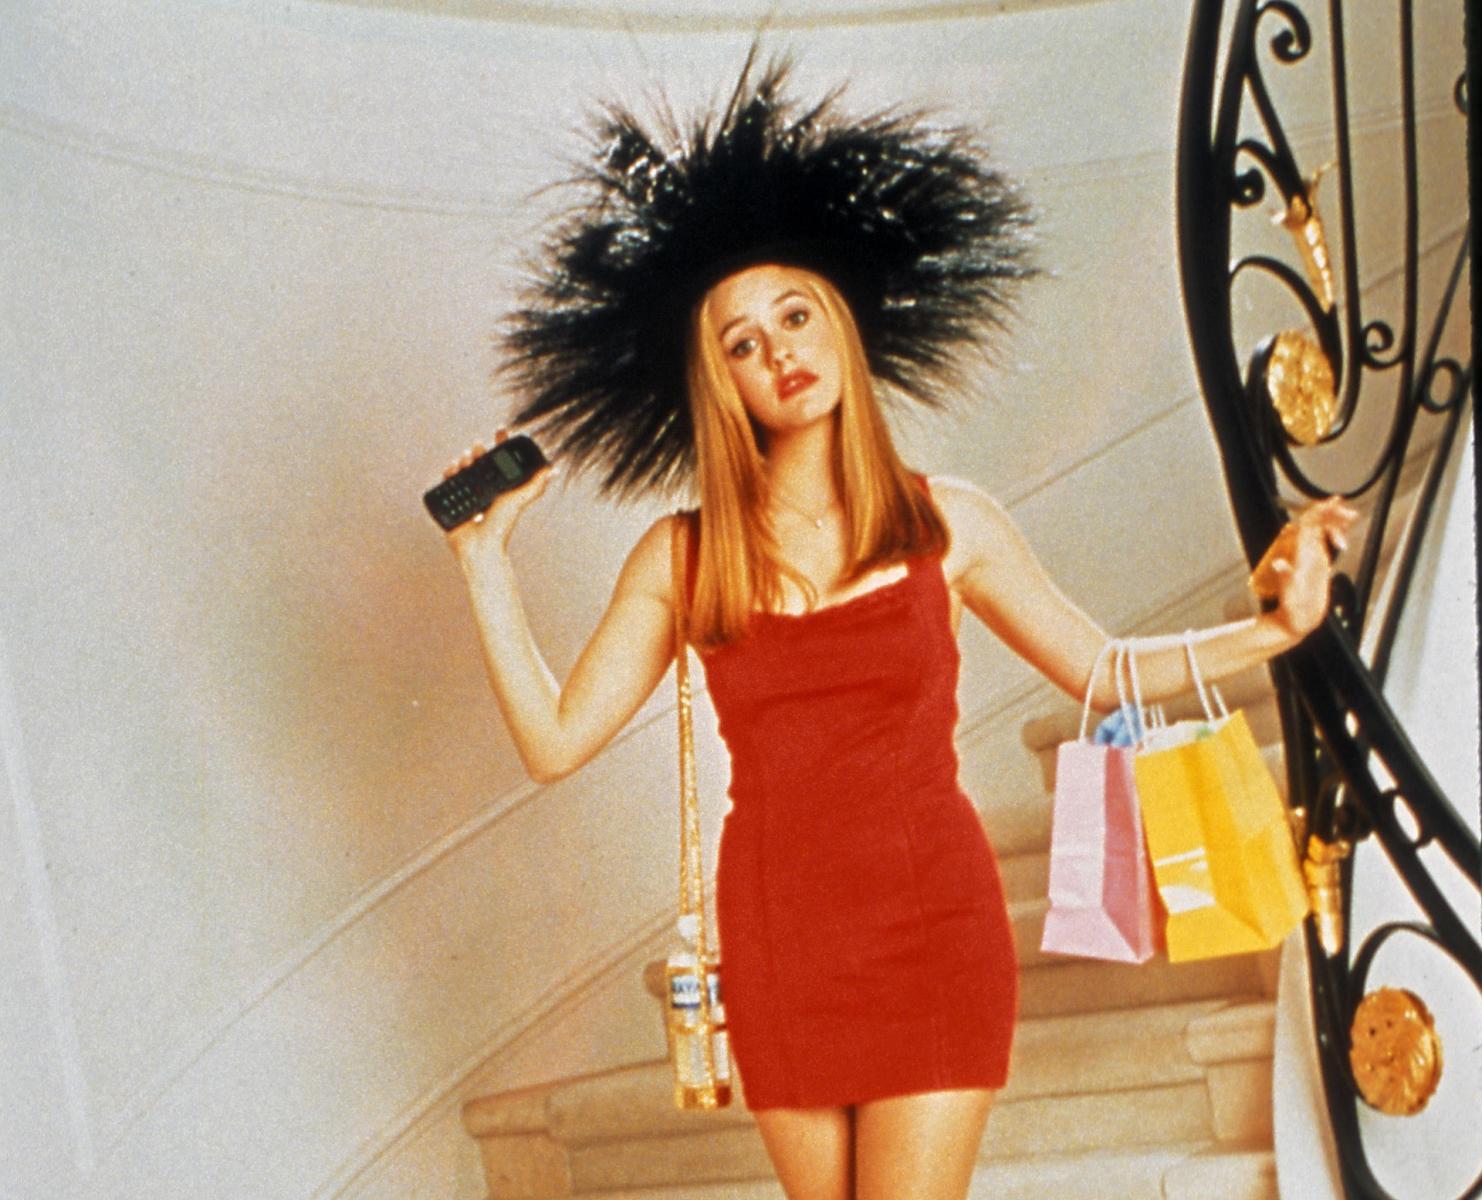 Costume Party: Ranking the 11 Most Memorable Movie Dresses of All Time - image 5